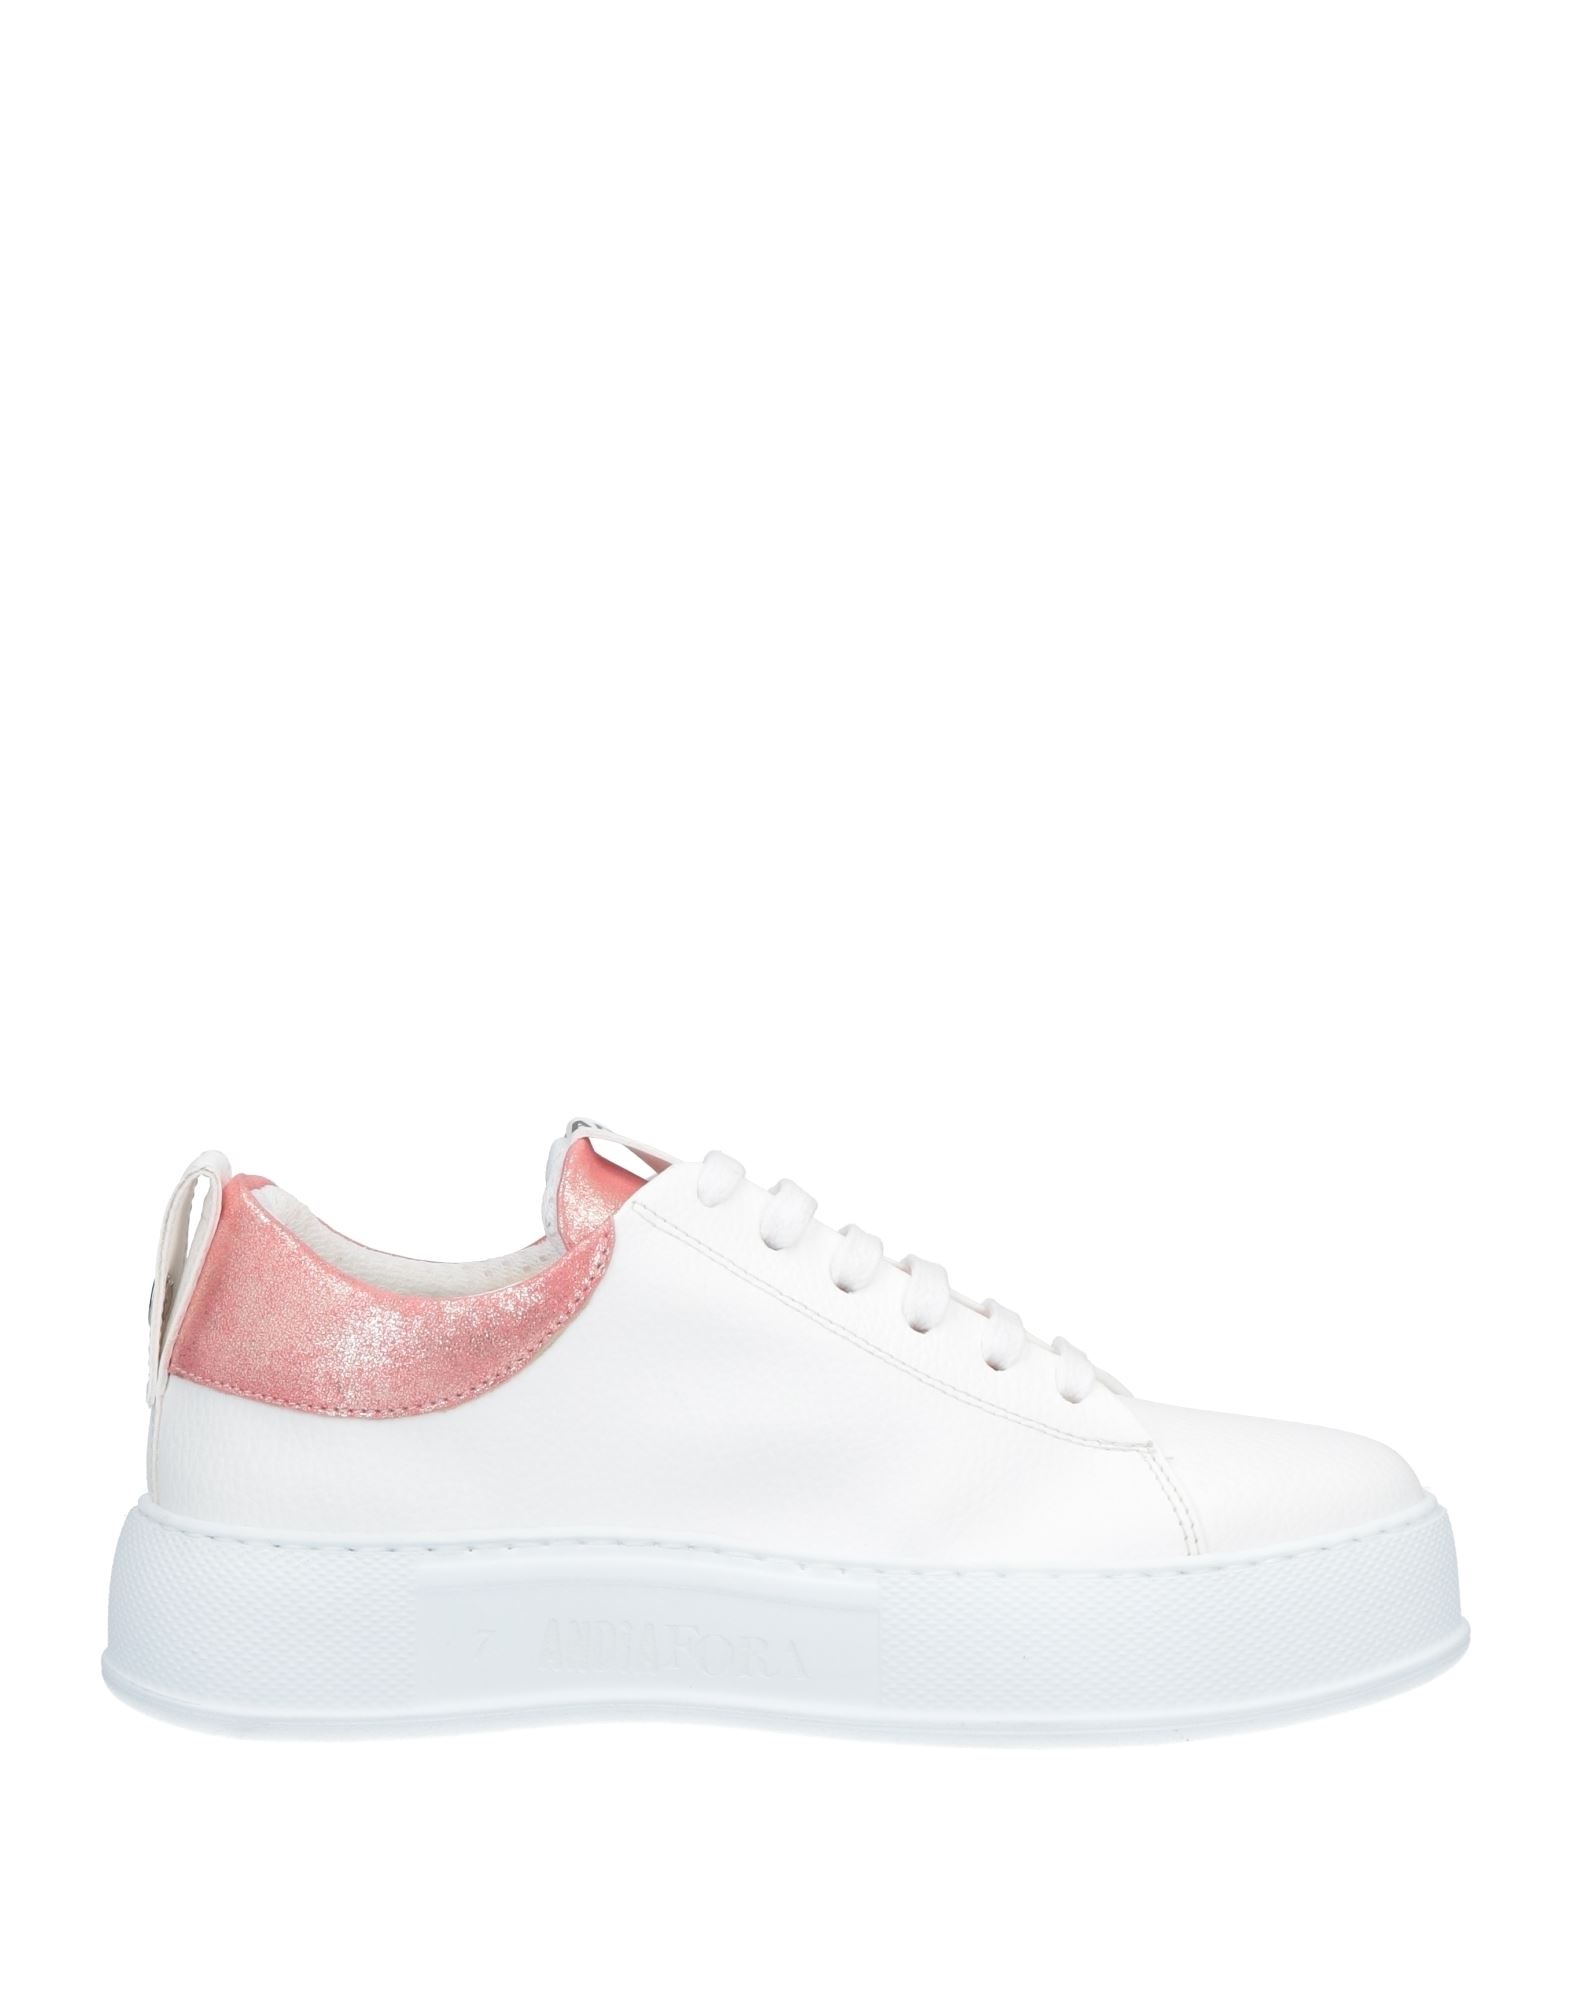 Shop Andìa Fora Woman Sneakers White Size 6 Soft Leather